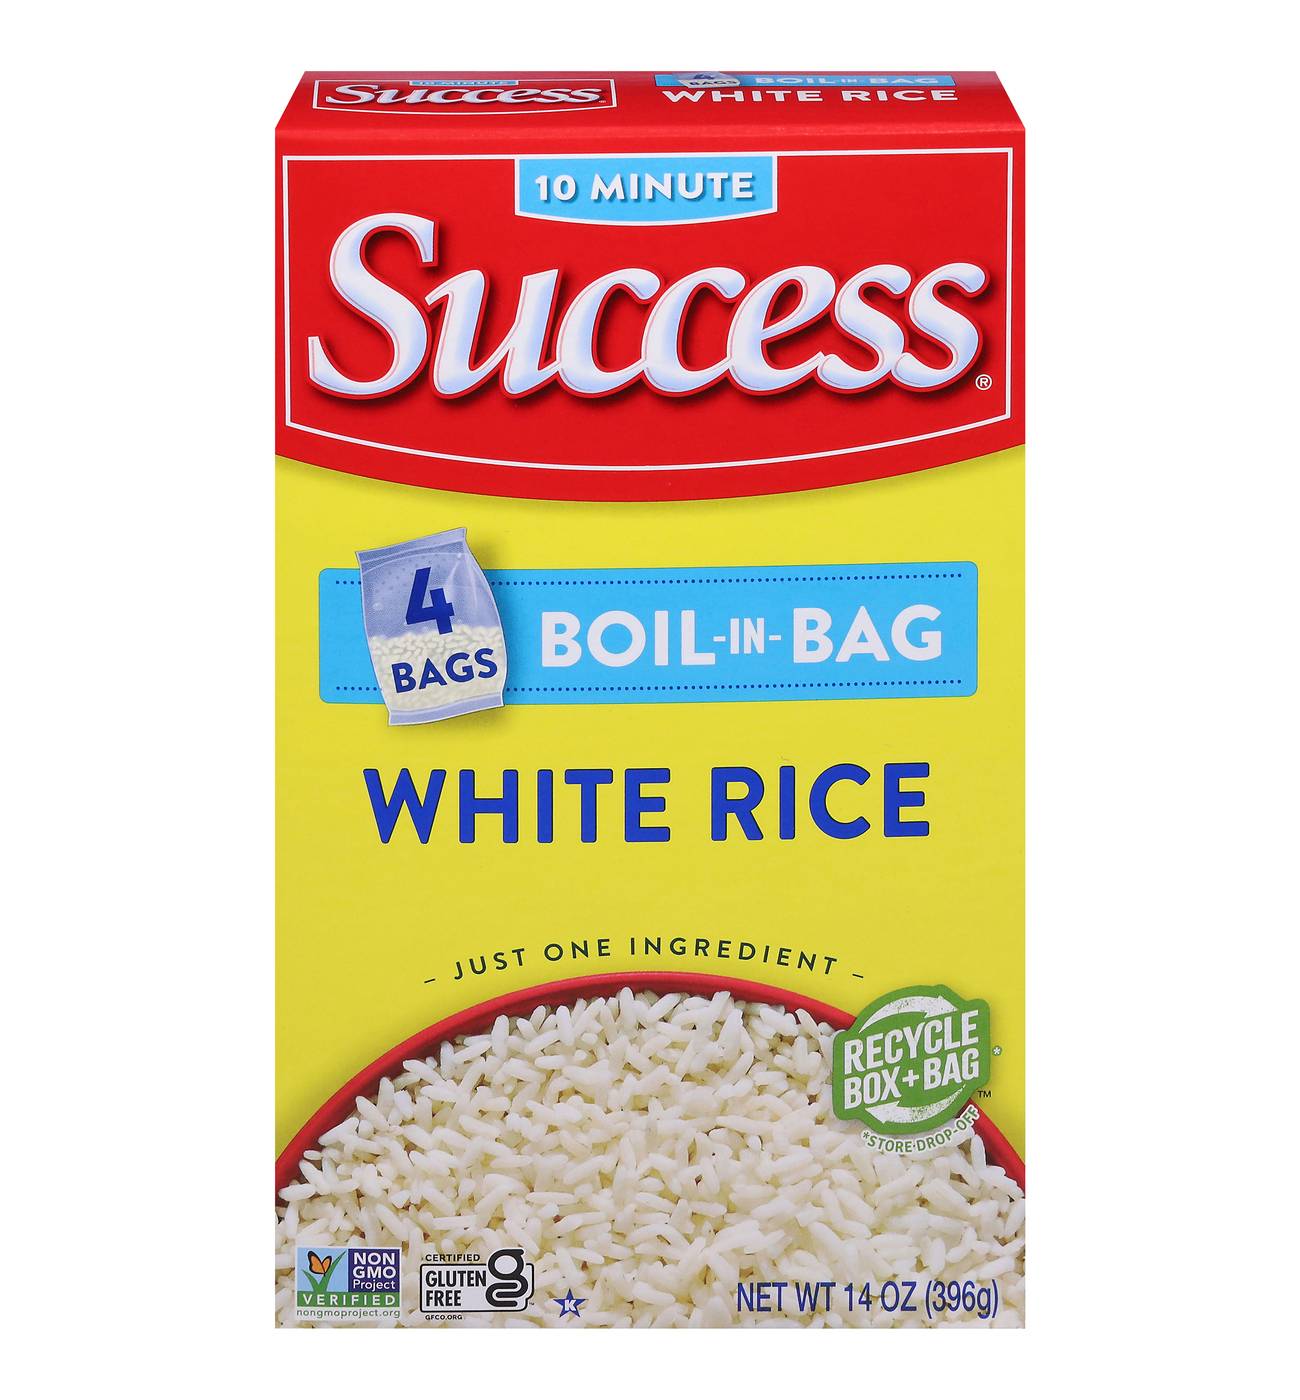 Success Boil-in-Bag White Rice; image 1 of 7